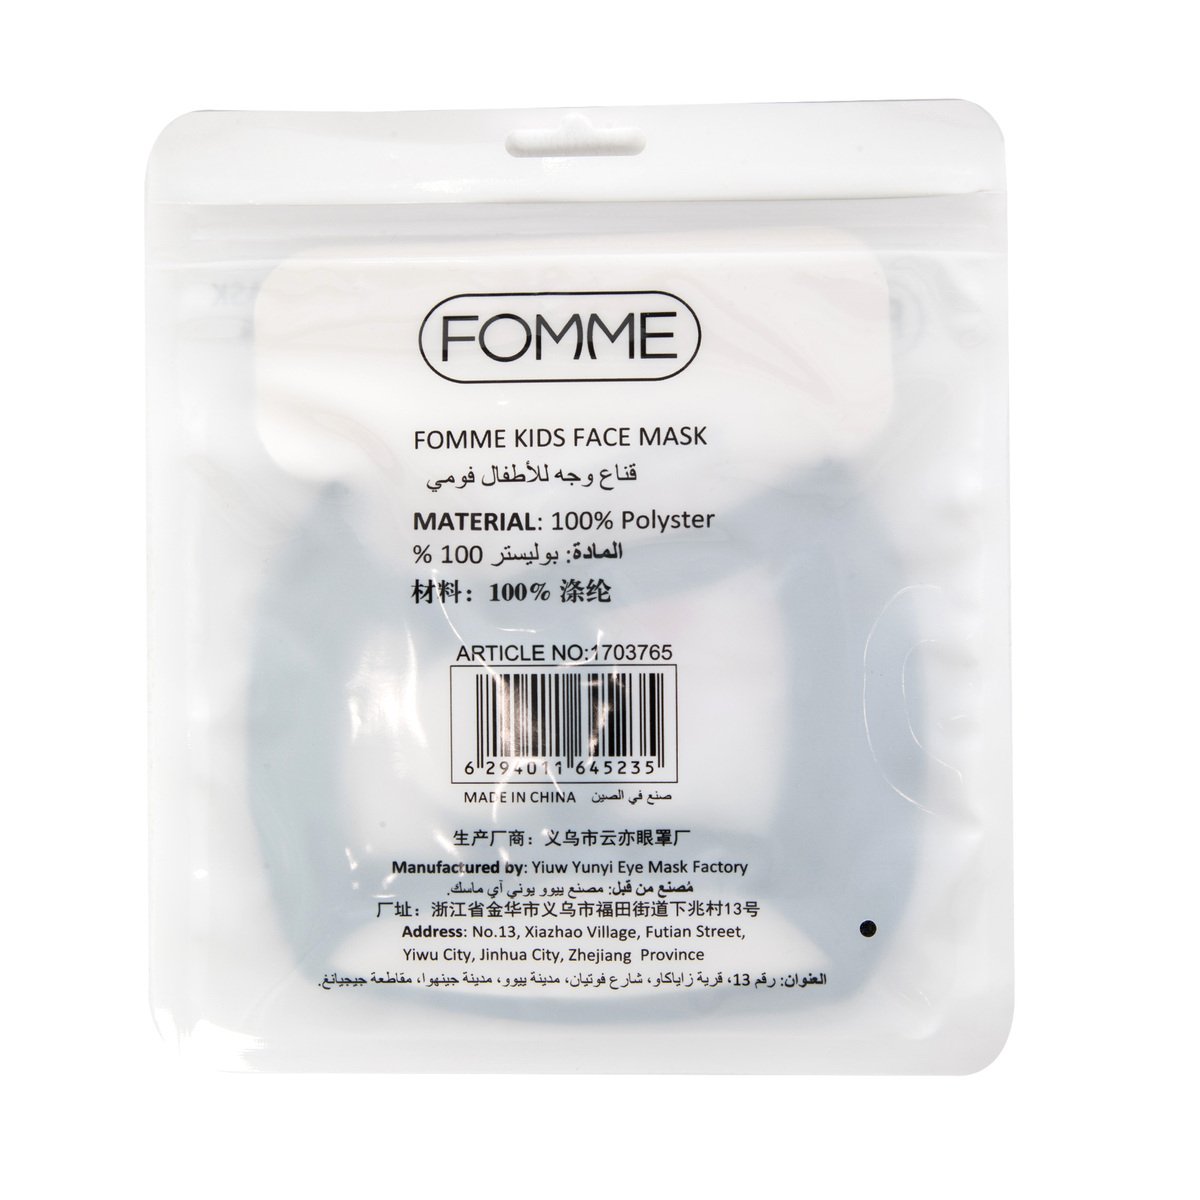 Fomme Kids Face Mask MG-6 1pc